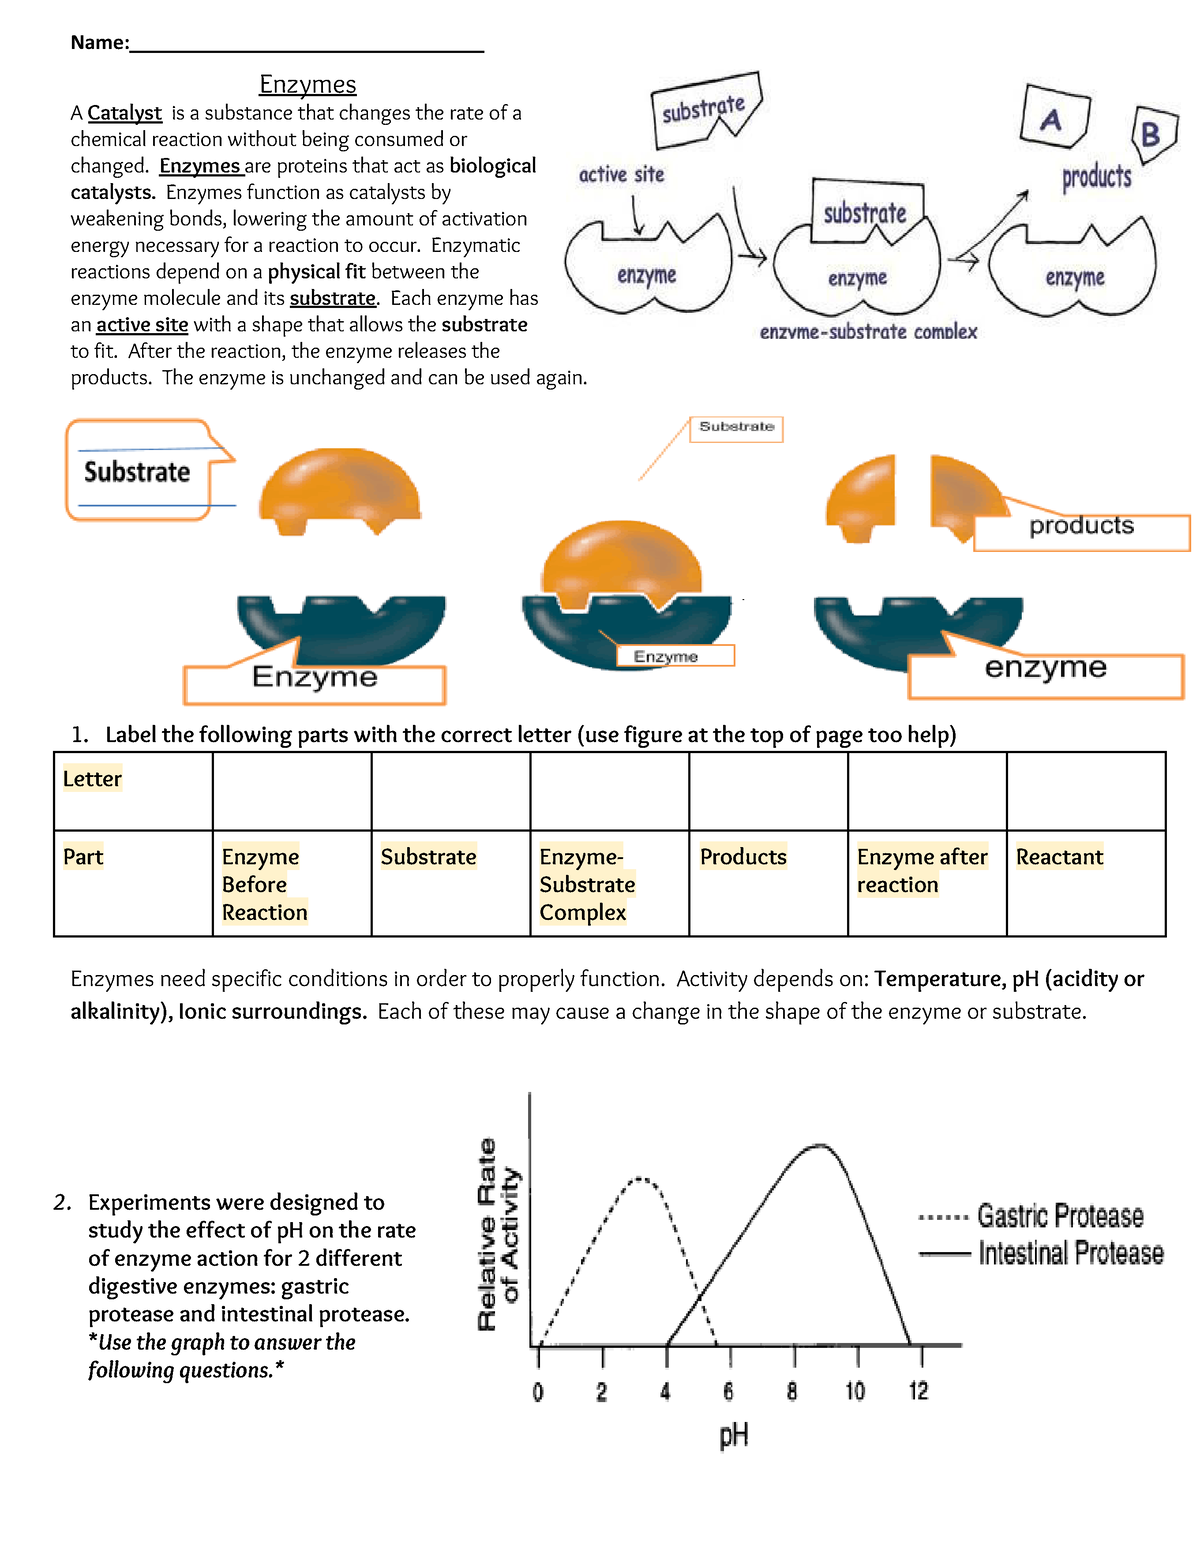 copy-of-simple-enzyme-worksheet-name-enzymes-a-catalyst-is-a